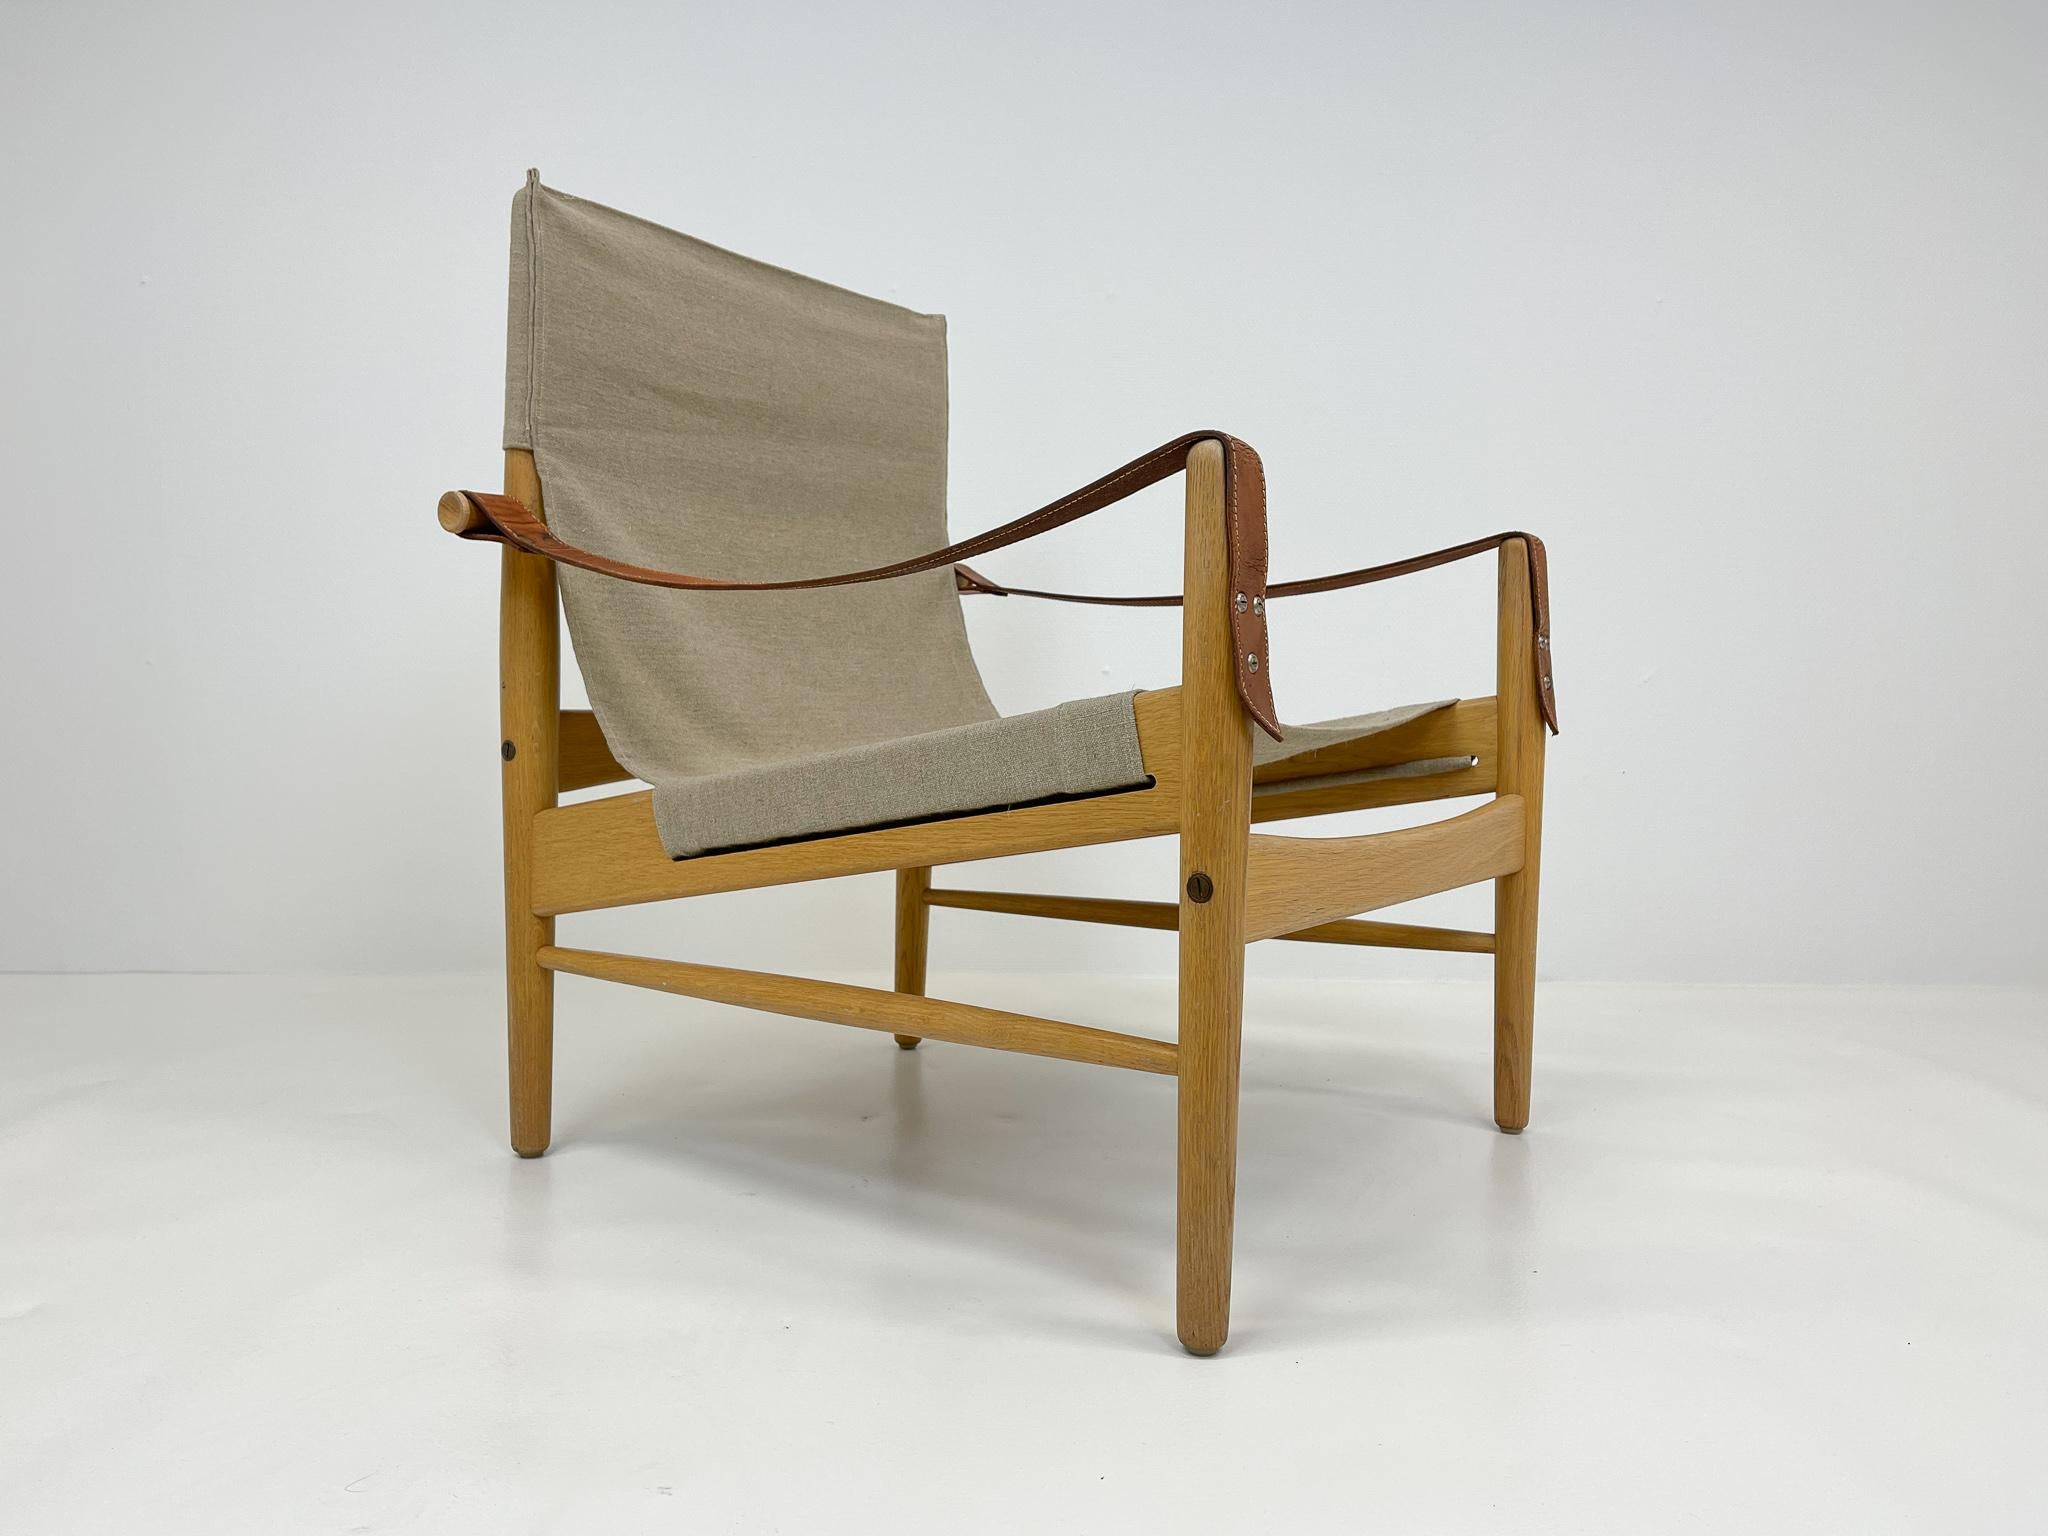 Beautiful safari chair designed by Hans Olsen for Viska Möbler in Kinna, Sweden.
This chair is made of oak with a new canvas Swedish quality linen upholstery.

Good vintage condition oak frame with the leather armrests with nice patina. Excellent